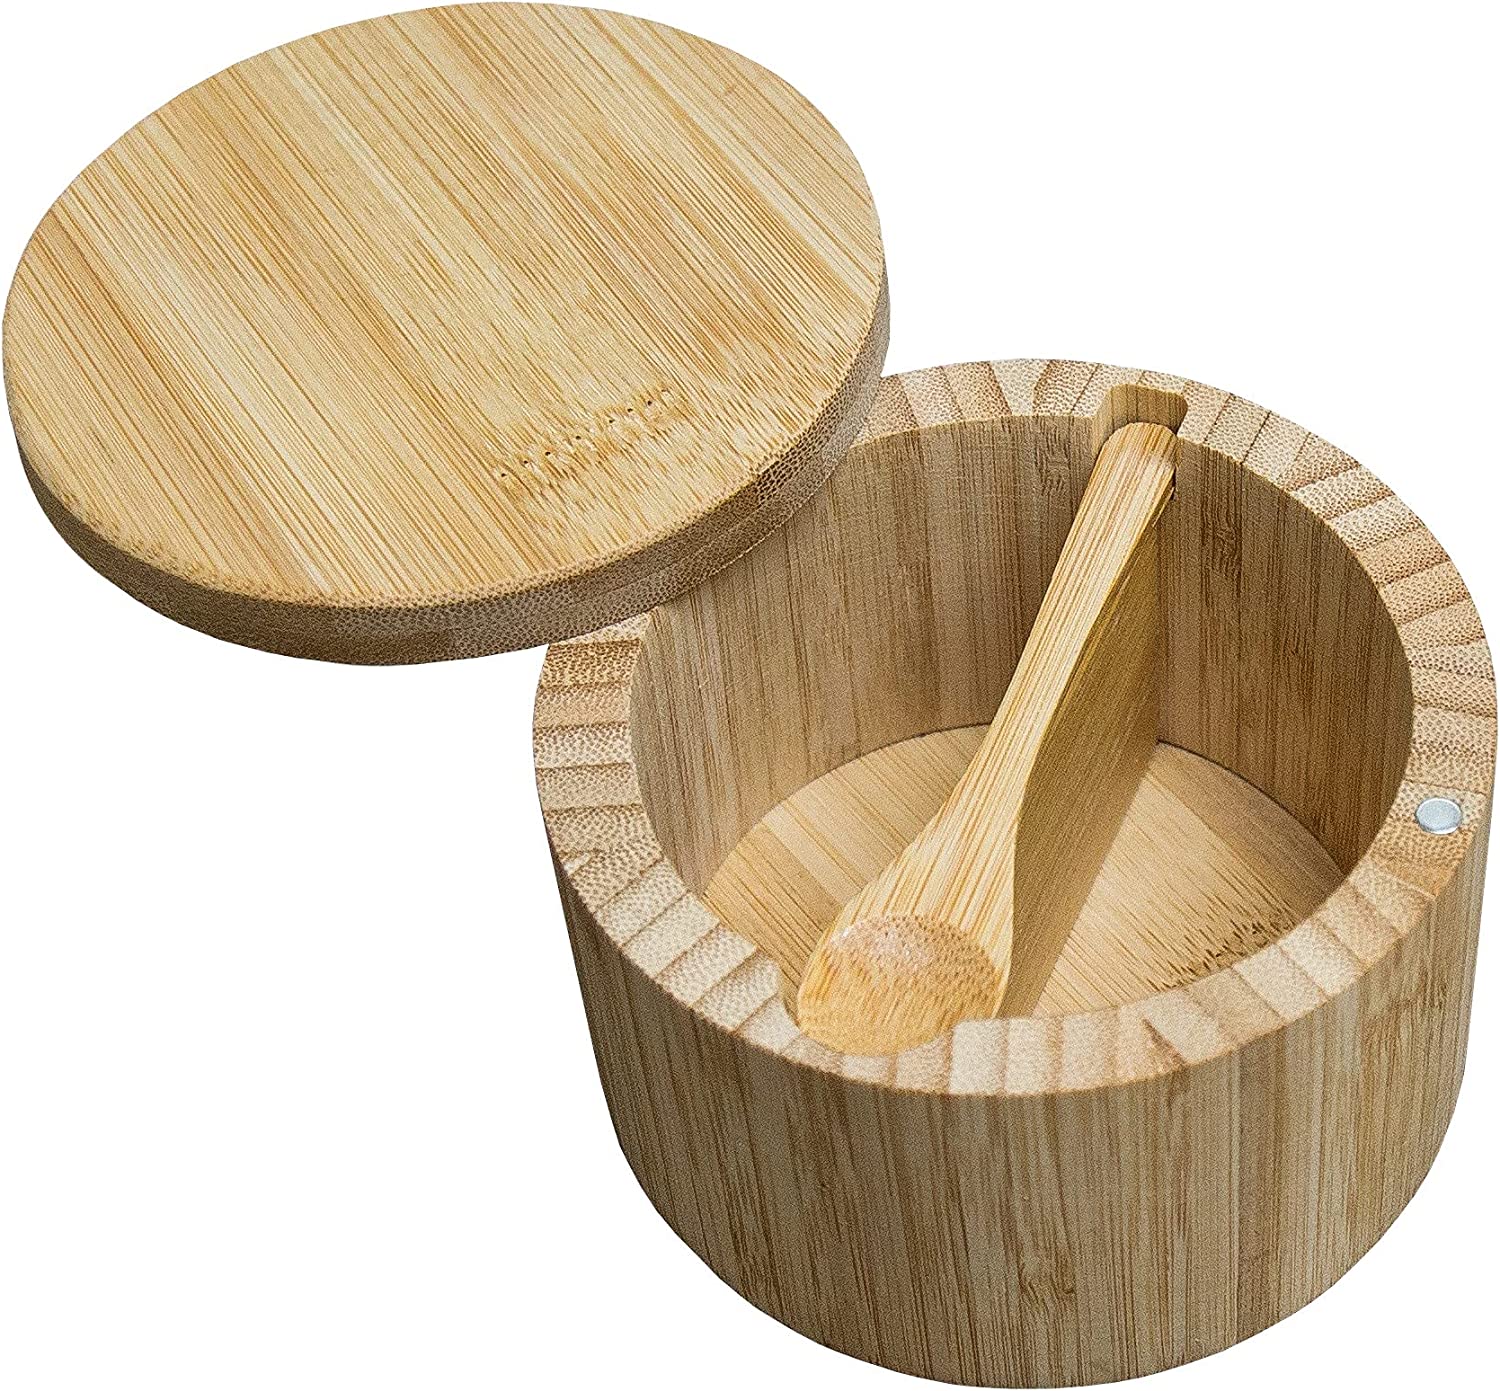 Bamboo Sugar Bowl or Spice Bowl with Spoon